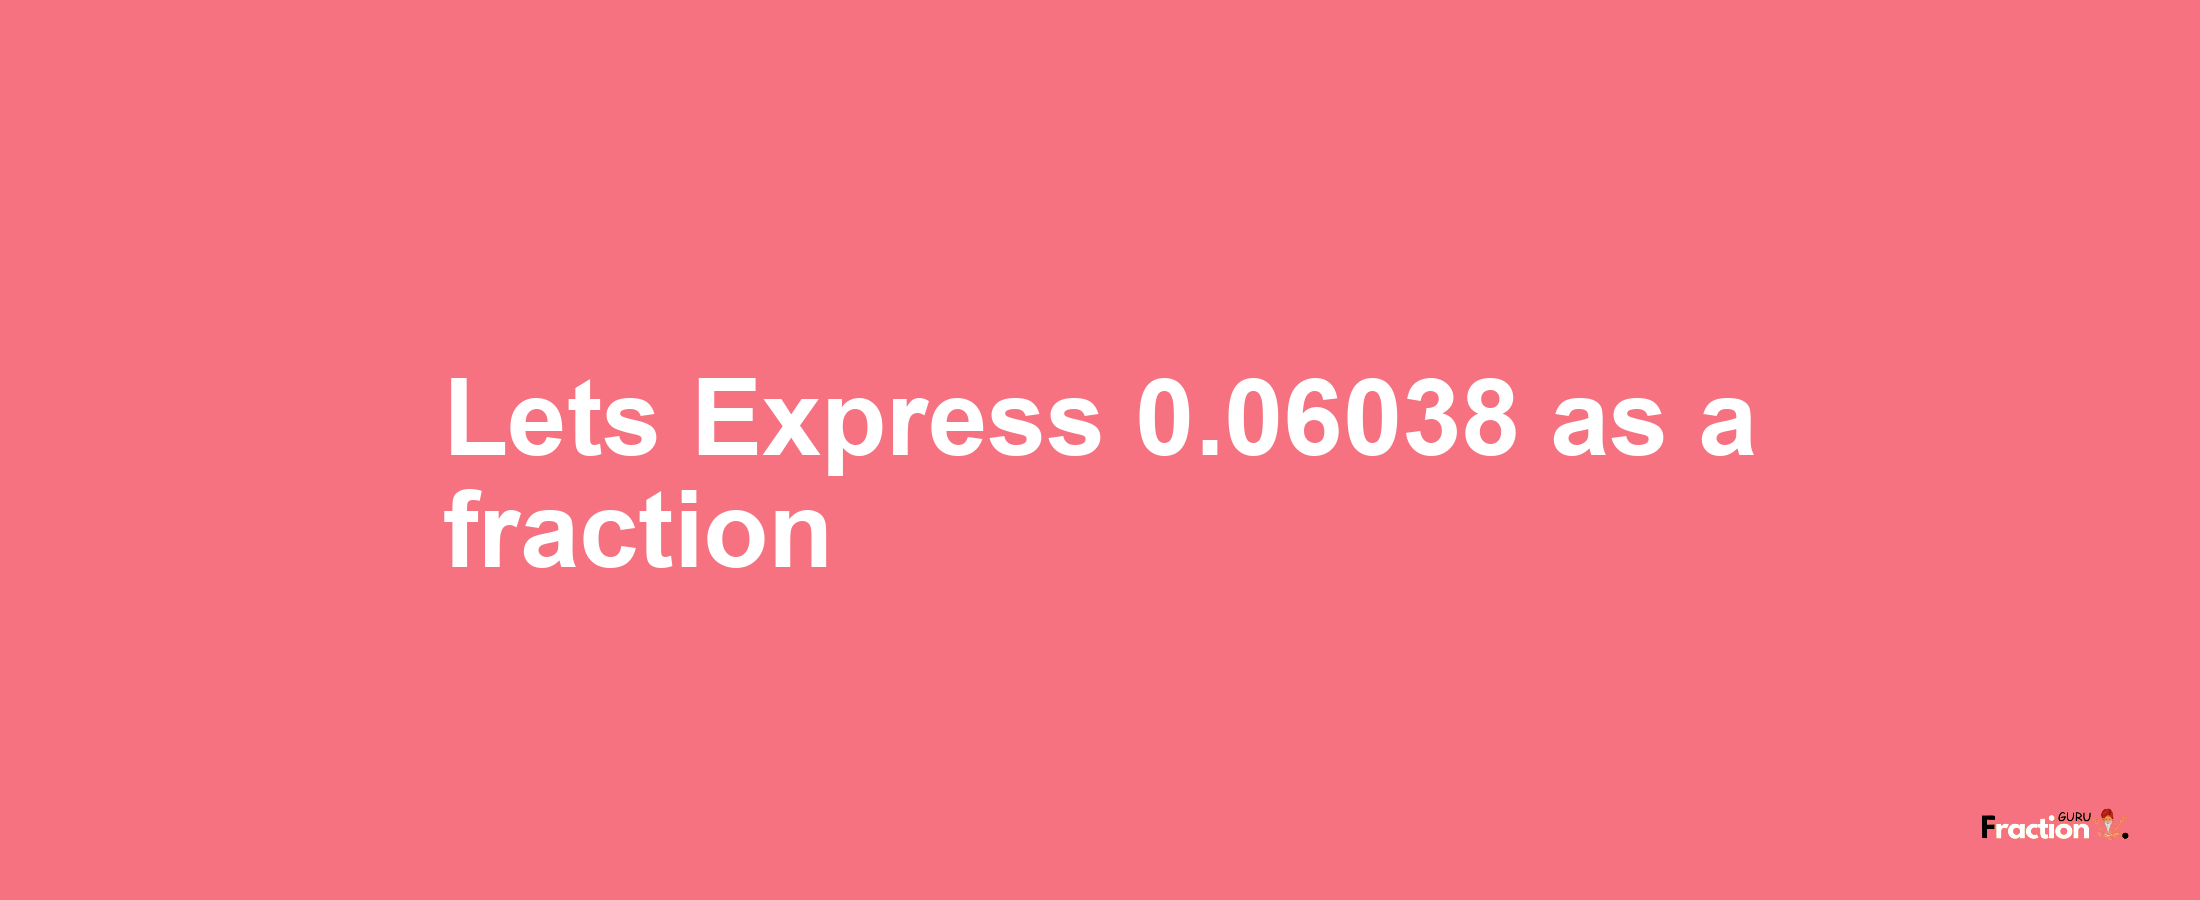 Lets Express 0.06038 as afraction